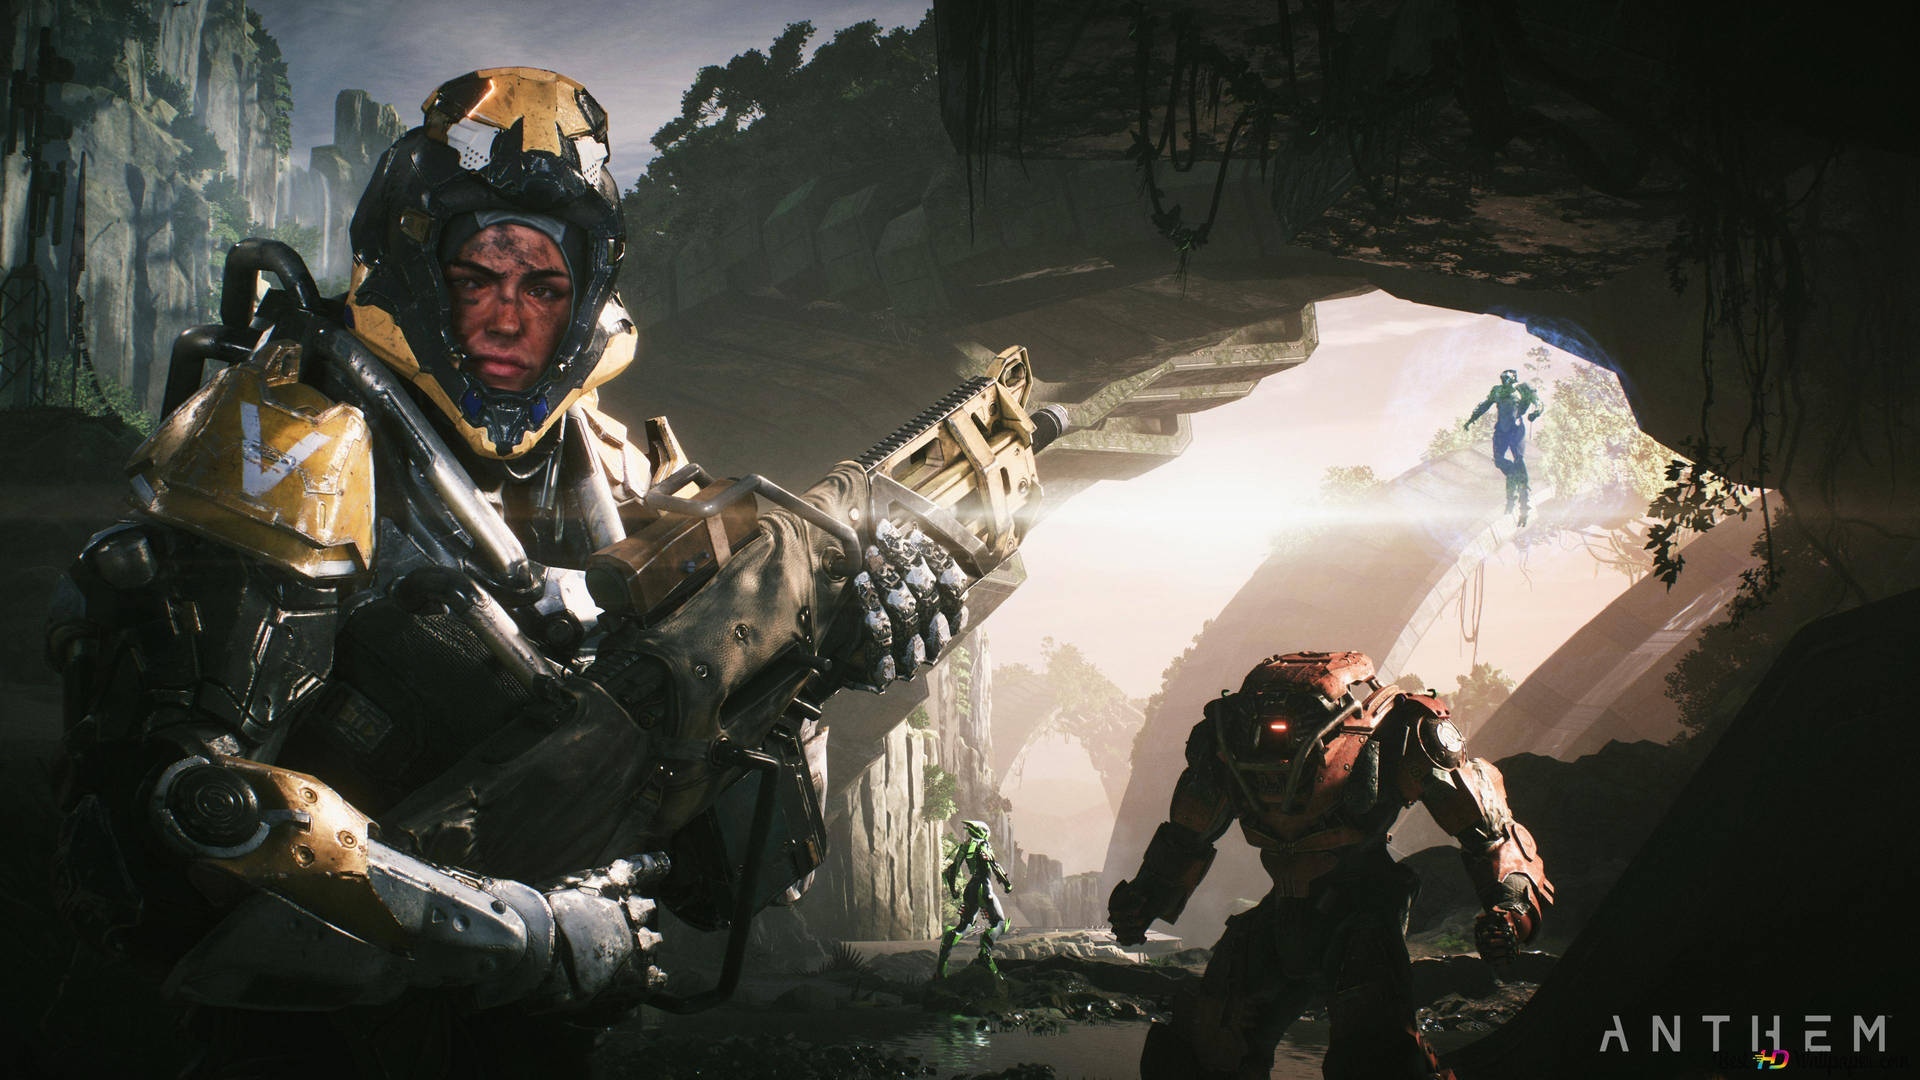 Dive into an Adventure of Danger and Discovery in Anthem Wallpaper